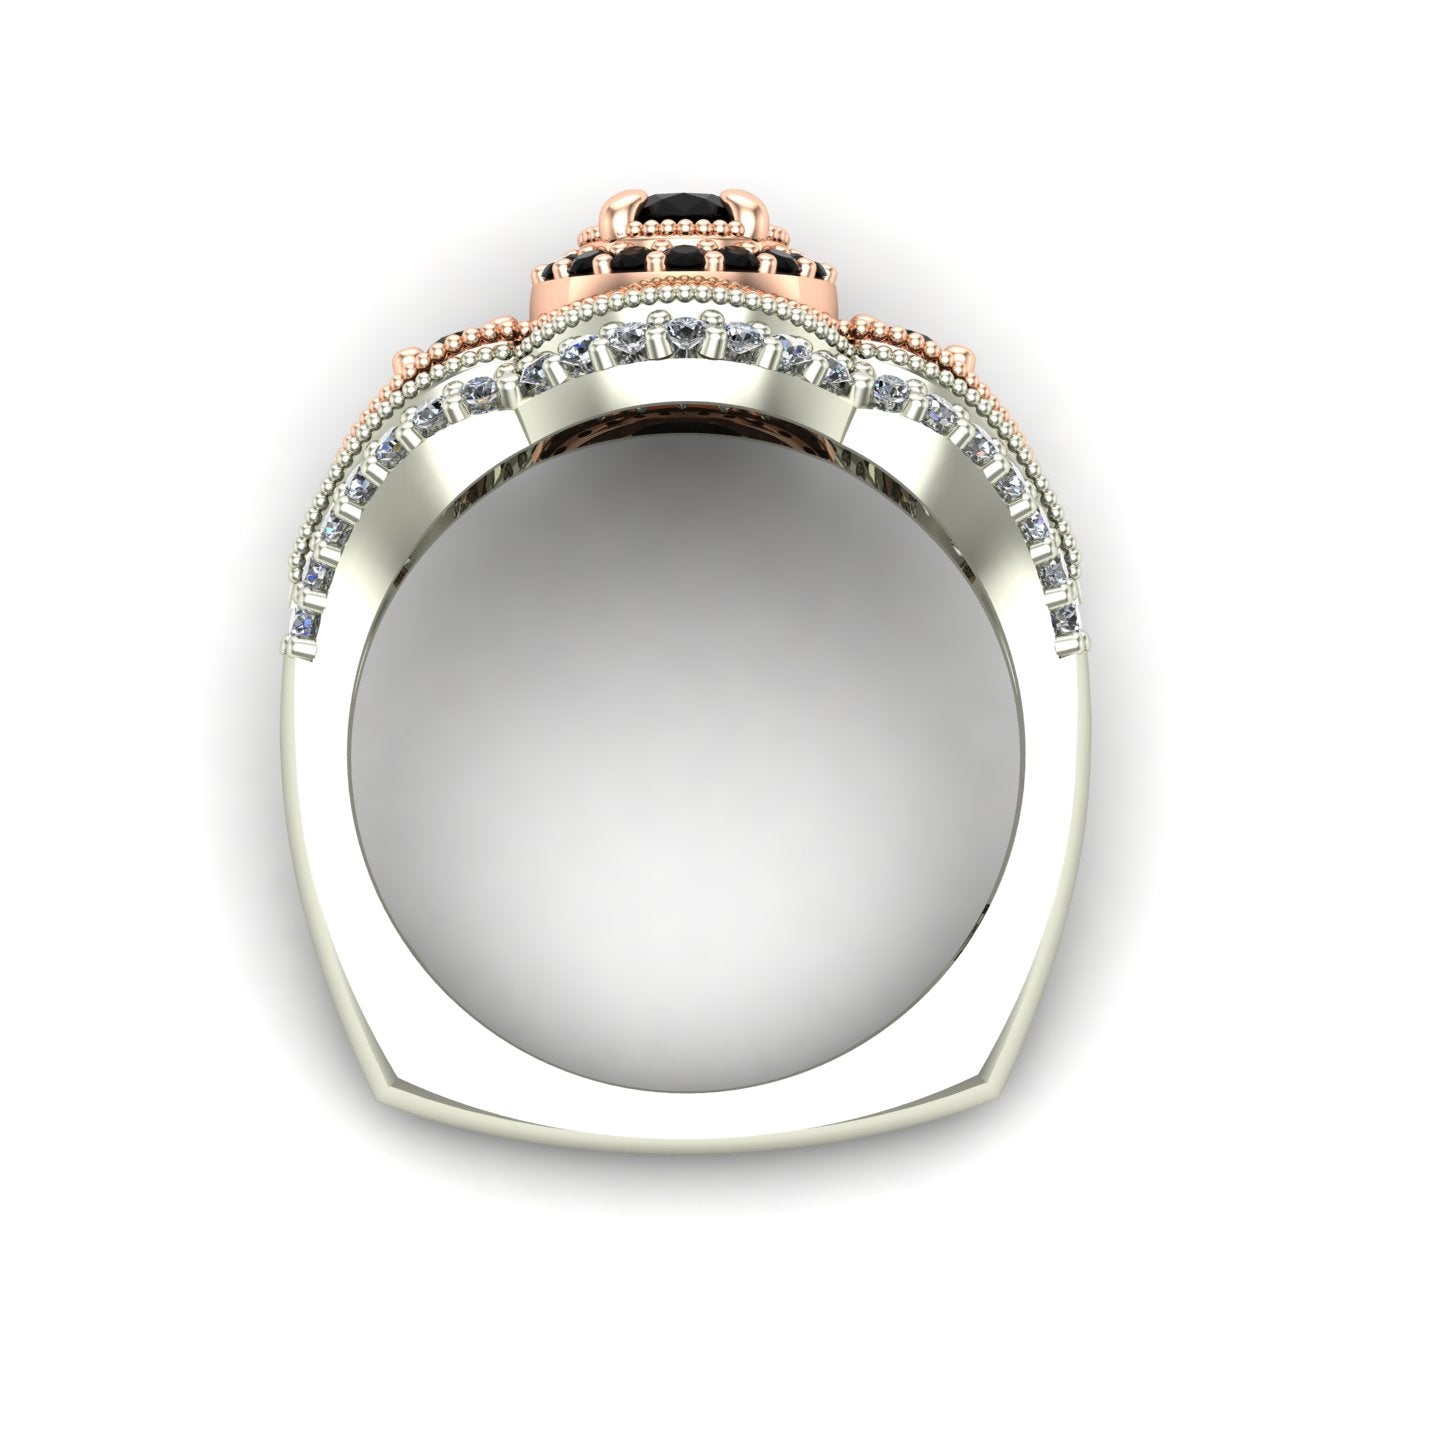 Black diamond two tone engagement ring in 14k white and rose gold - Charles Babb Designs - through finger view